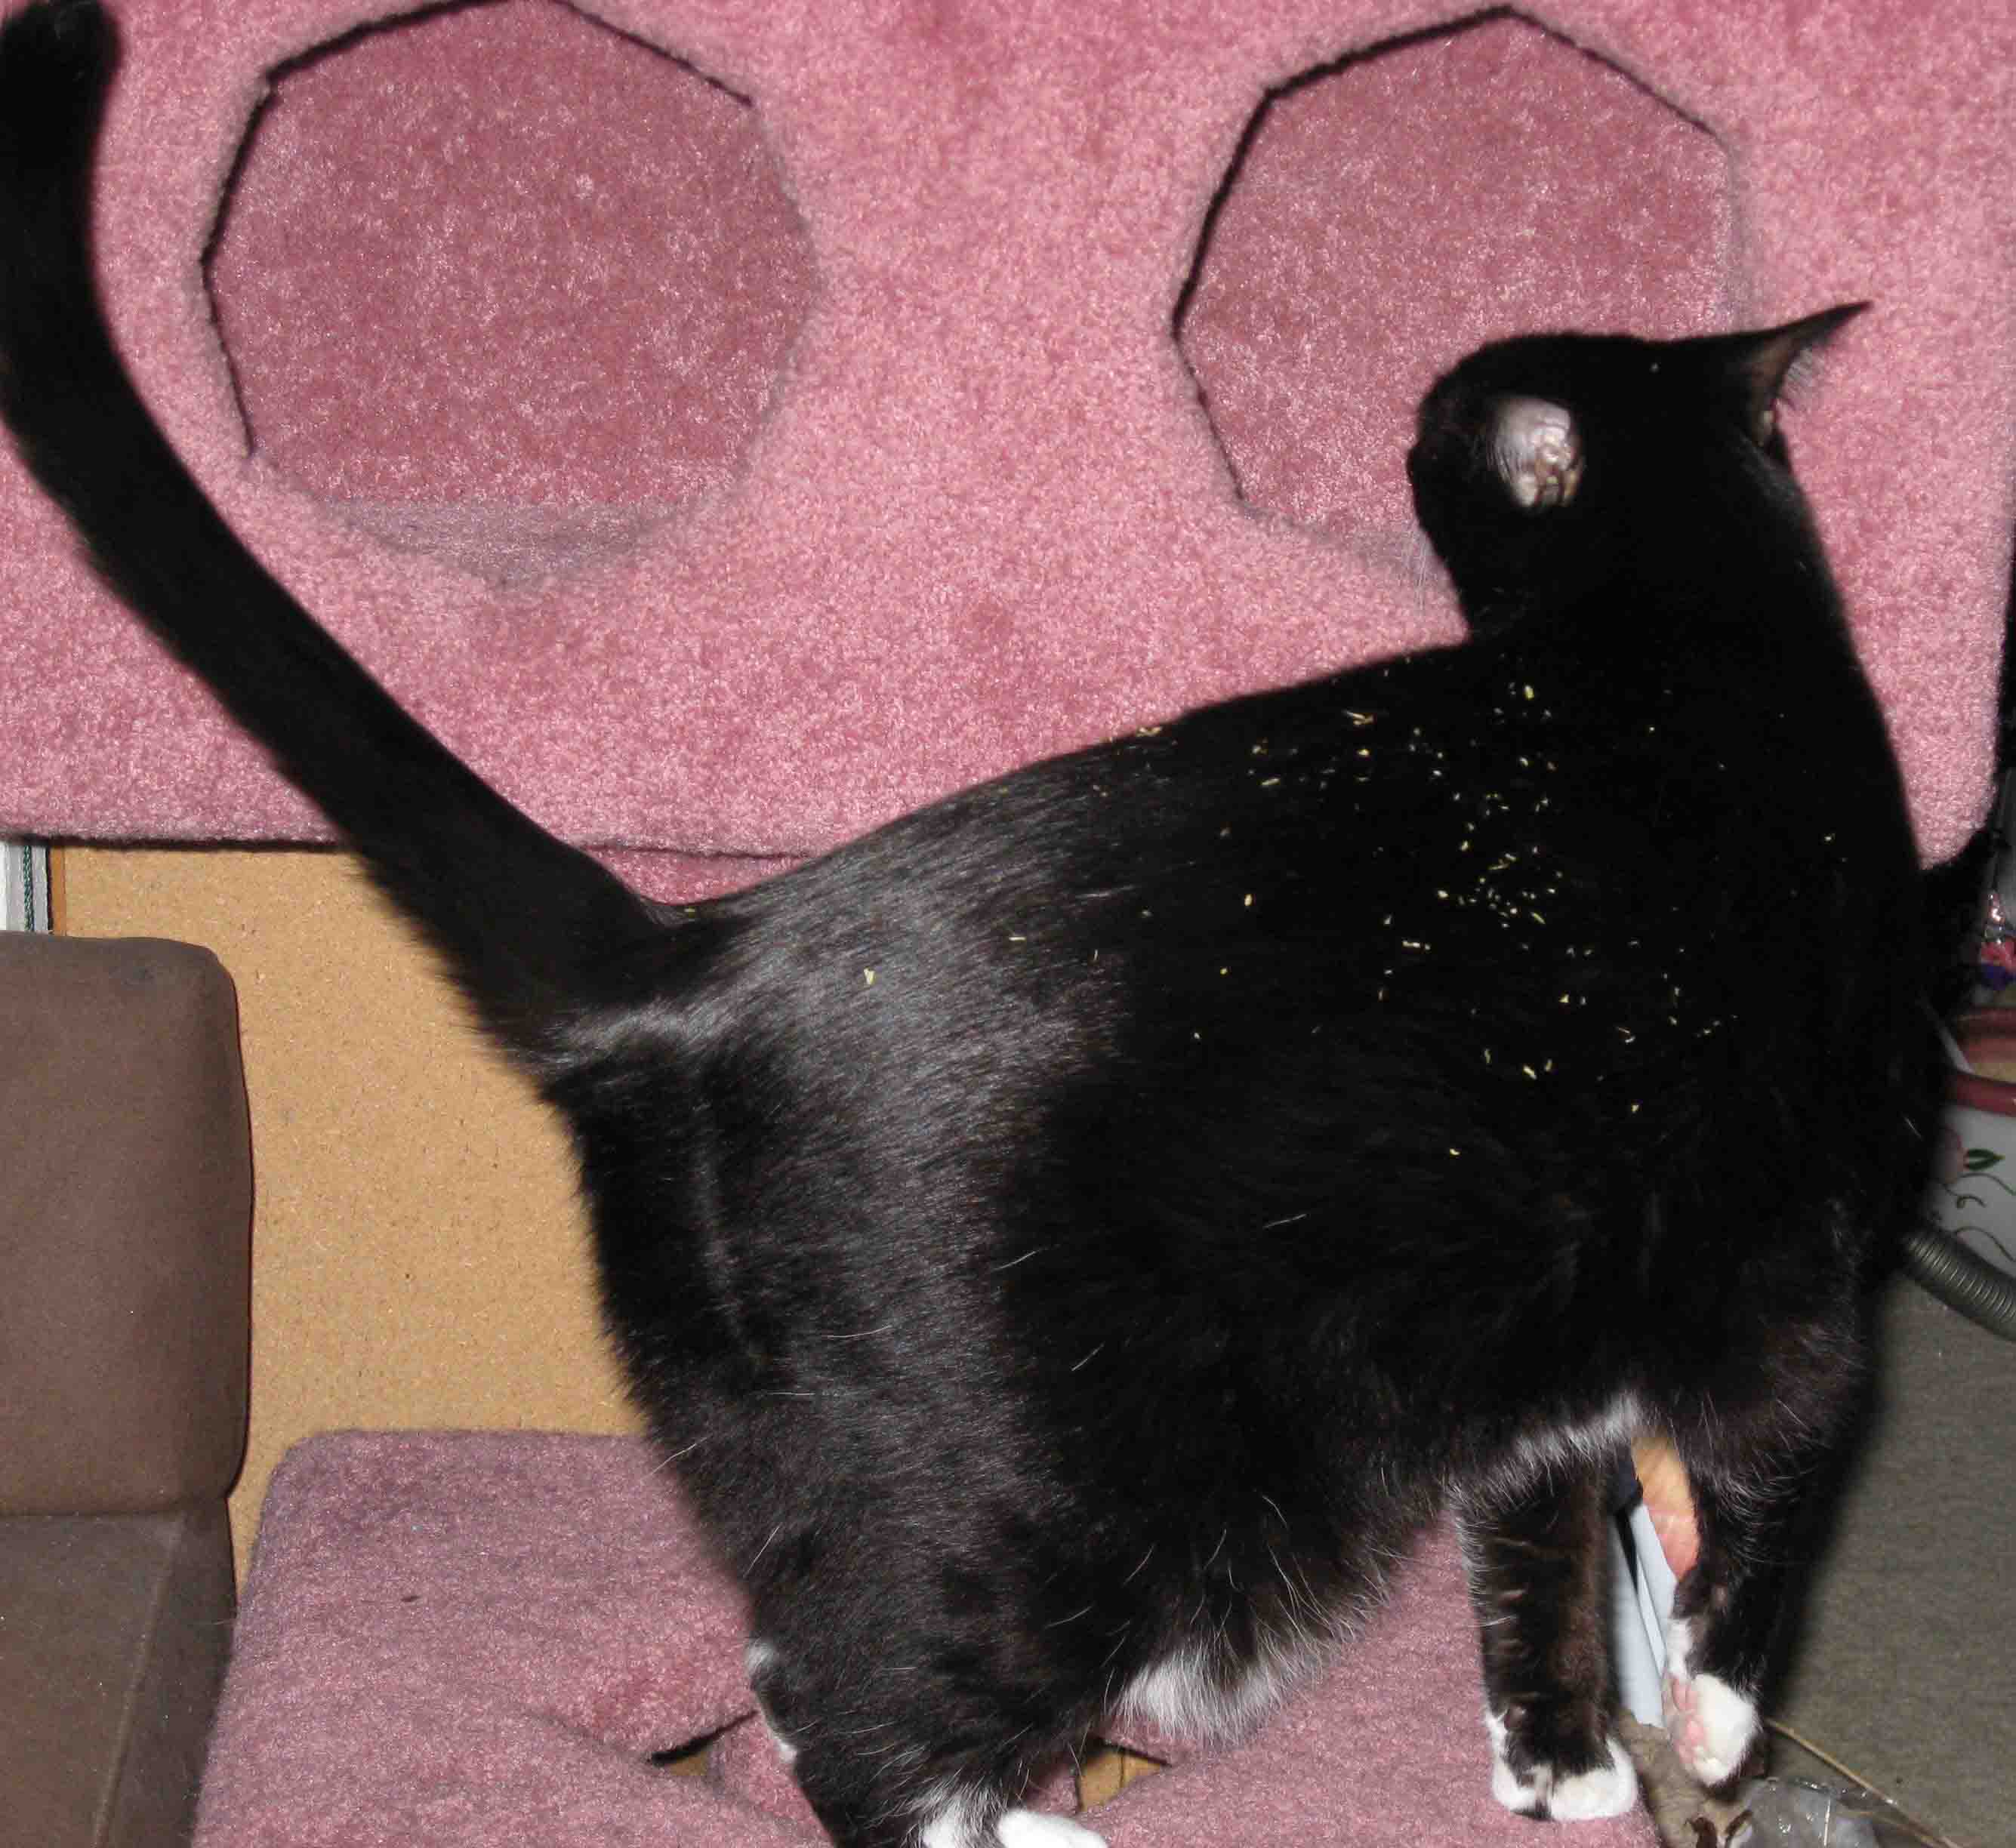 I KNOW that's not catnip on my back. I KNOW my owner would not do that to me.